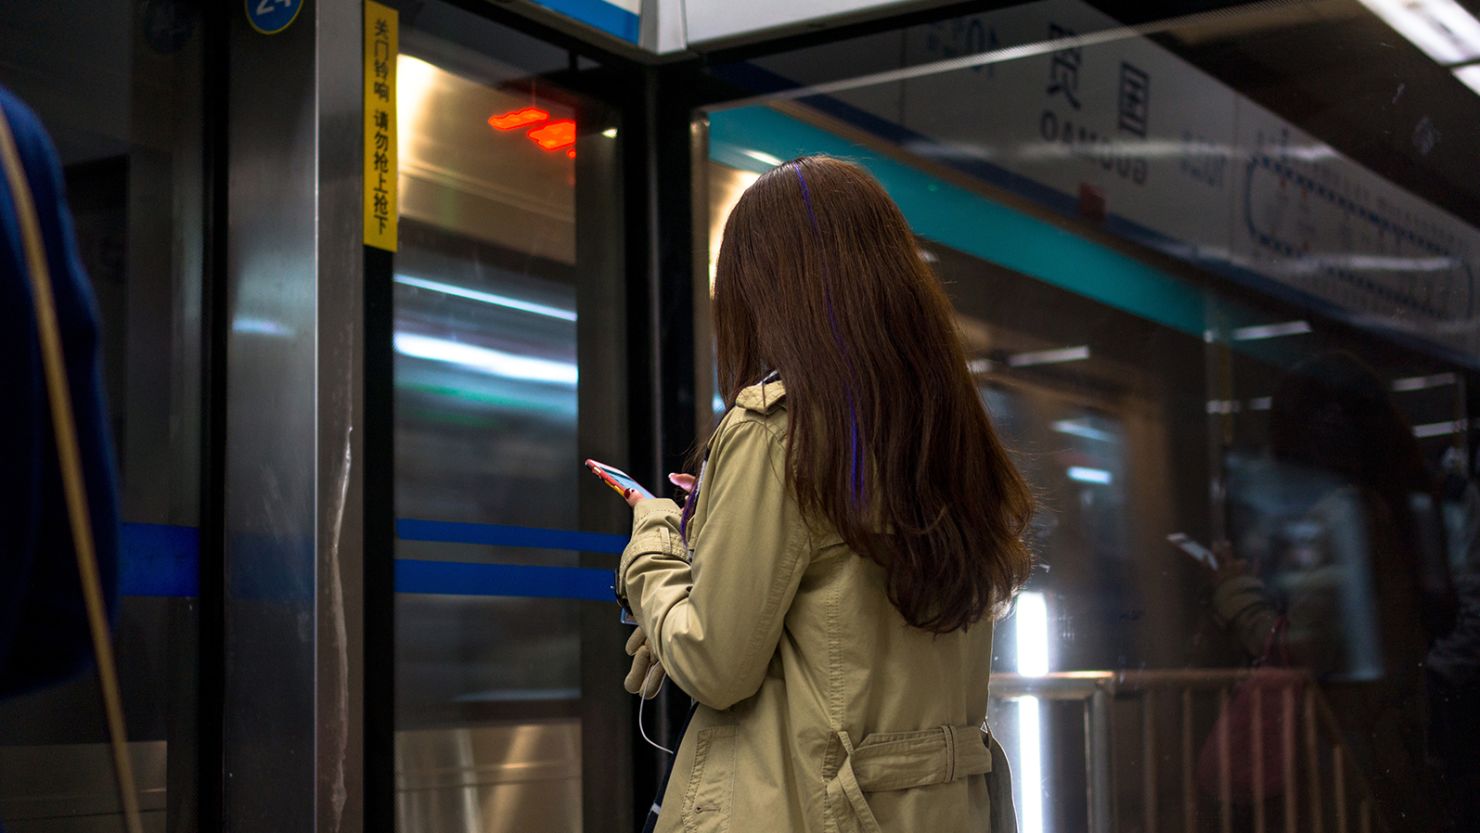 Passengers read their smart phones while waiting for the subway train in Beijing.